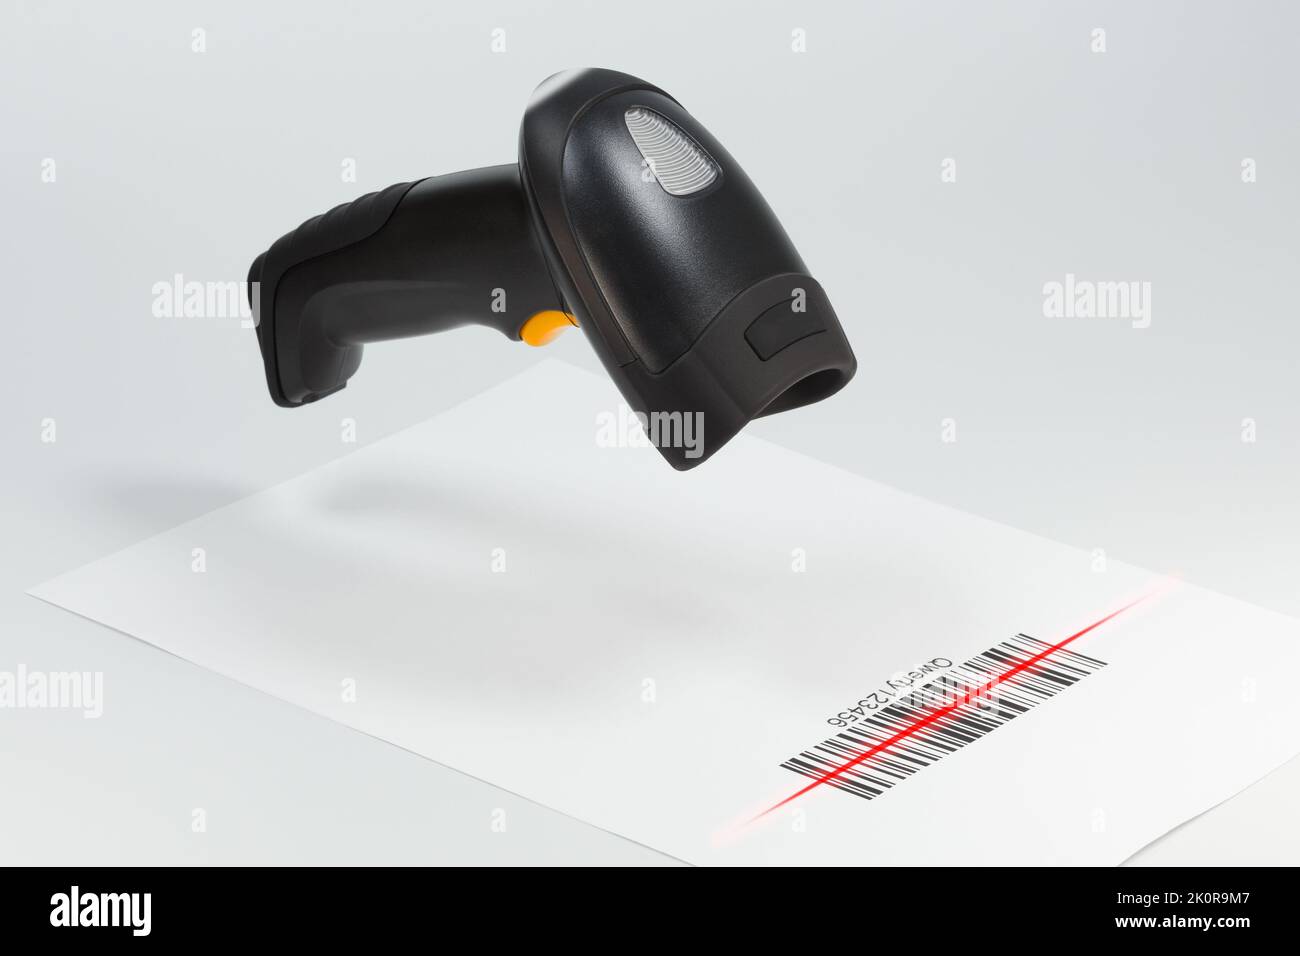 Black barcode scanner scans a barcode on a white page.Automated information processing Stock Photo